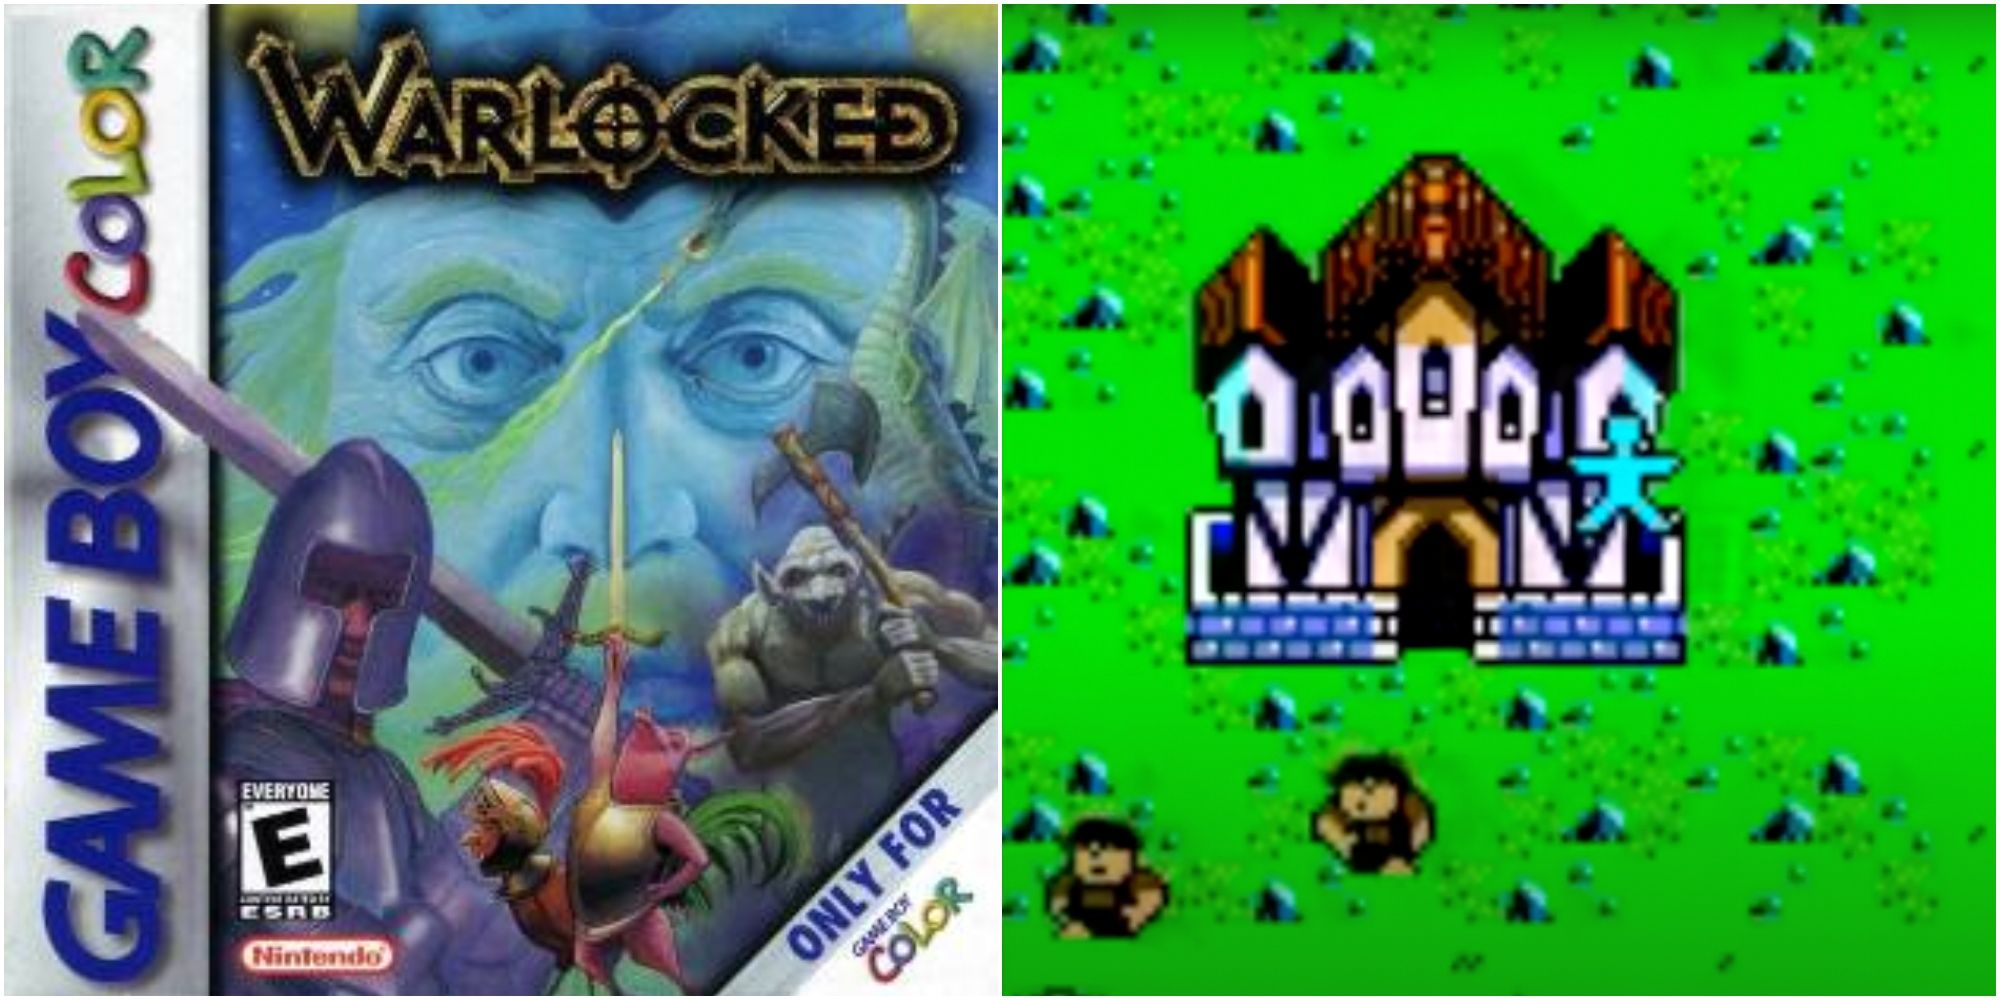 Warlocked Game Boy Color cover beside a screenshot of a castle from the game